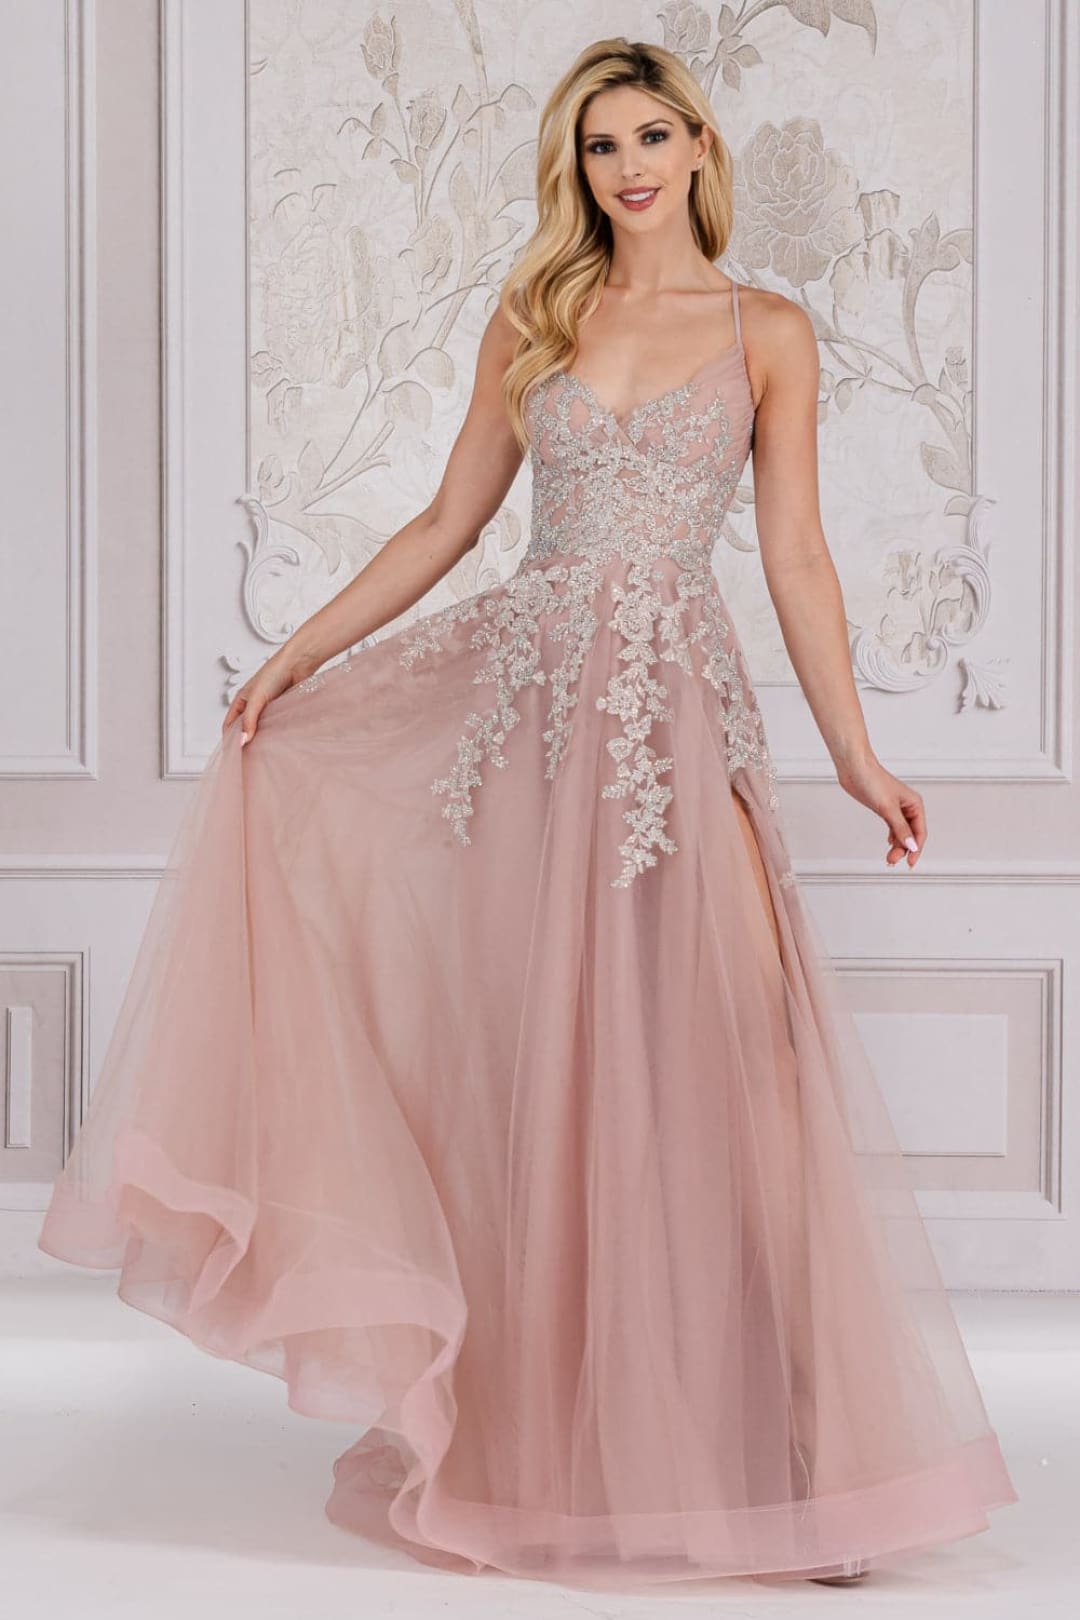 Amarra Style 54293 | Ball gowns, Blush wedding gown, Quinceanera dresses  blush